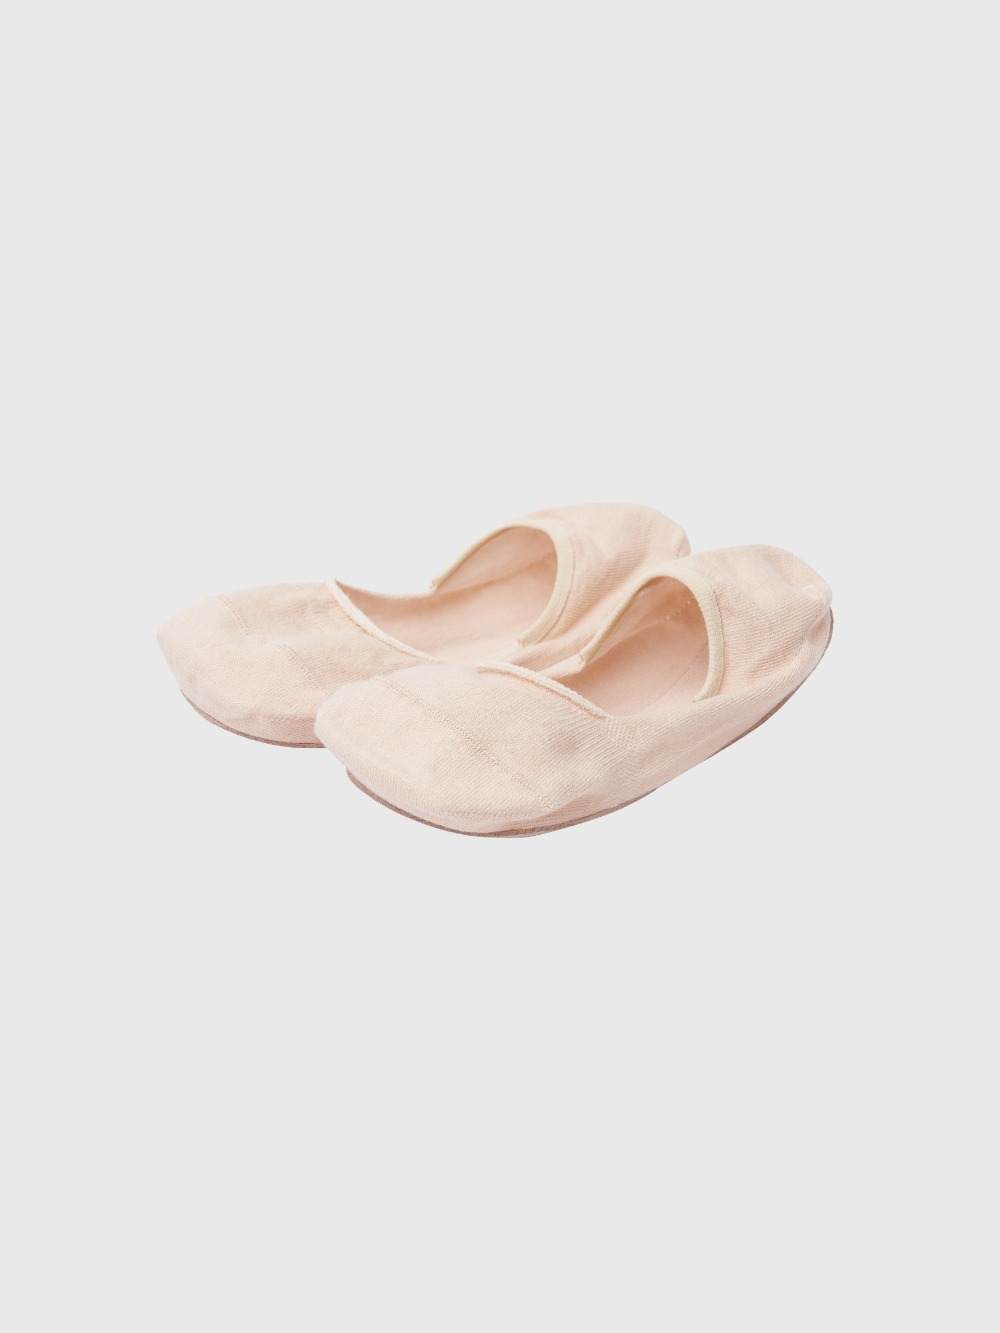 PROTECTION FOR POINTE SHOES